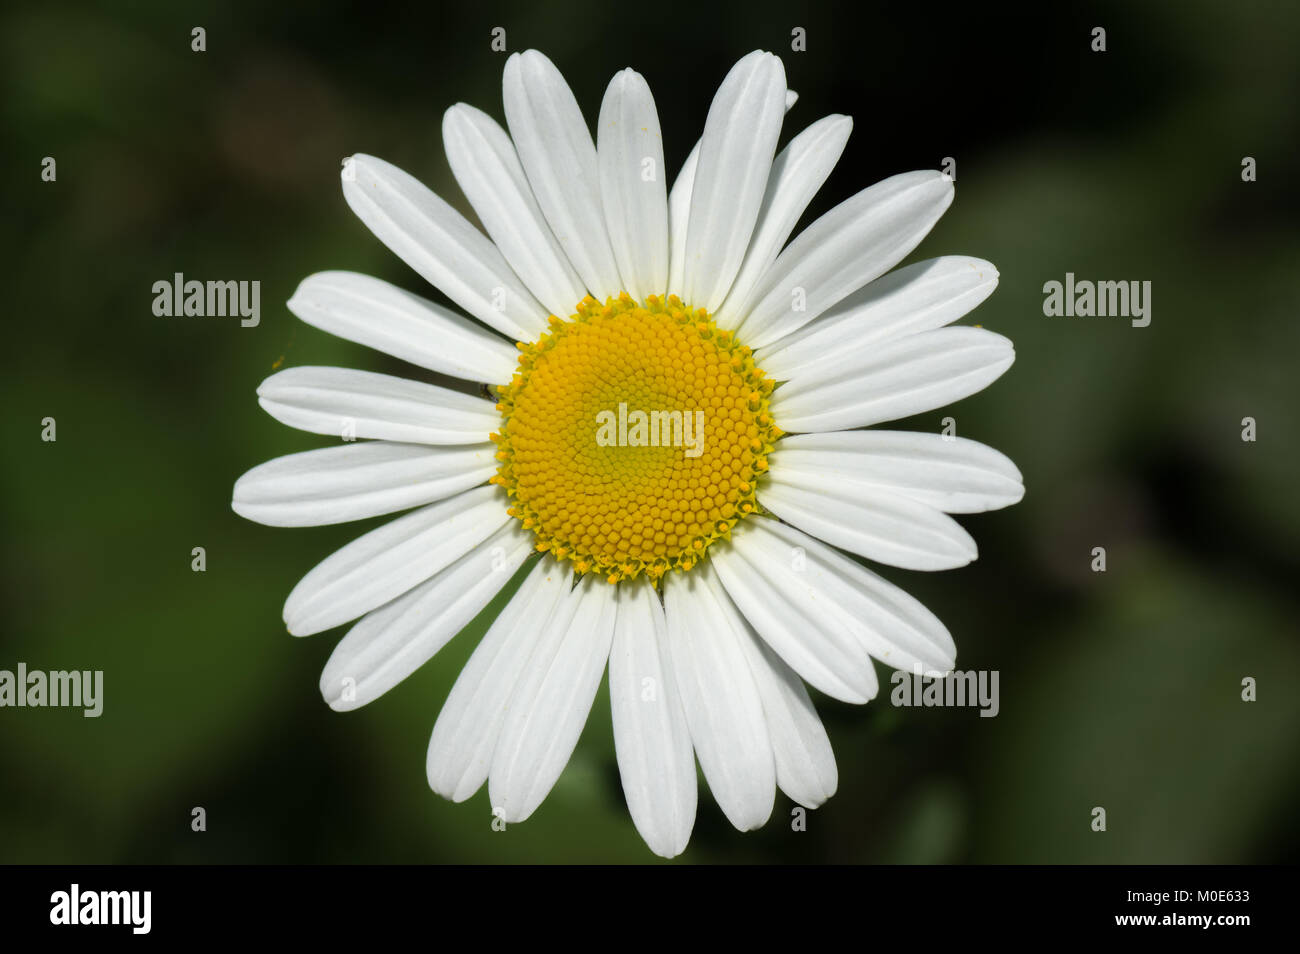 A Natural Wild Daisy Flower Stock Photo